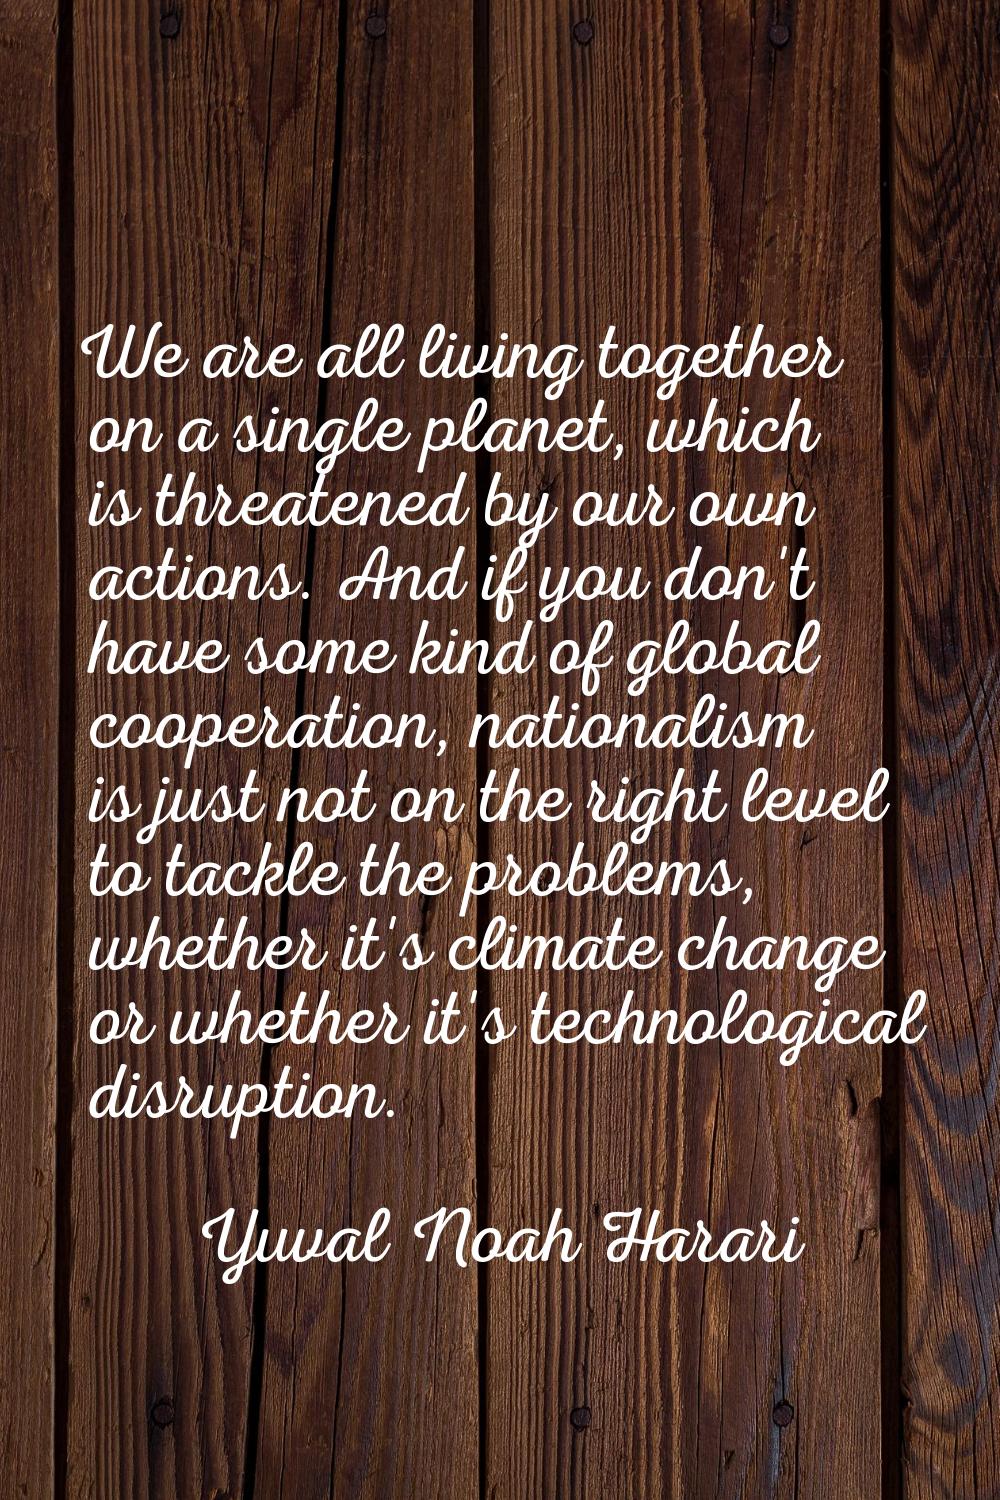 We are all living together on a single planet, which is threatened by our own actions. And if you d